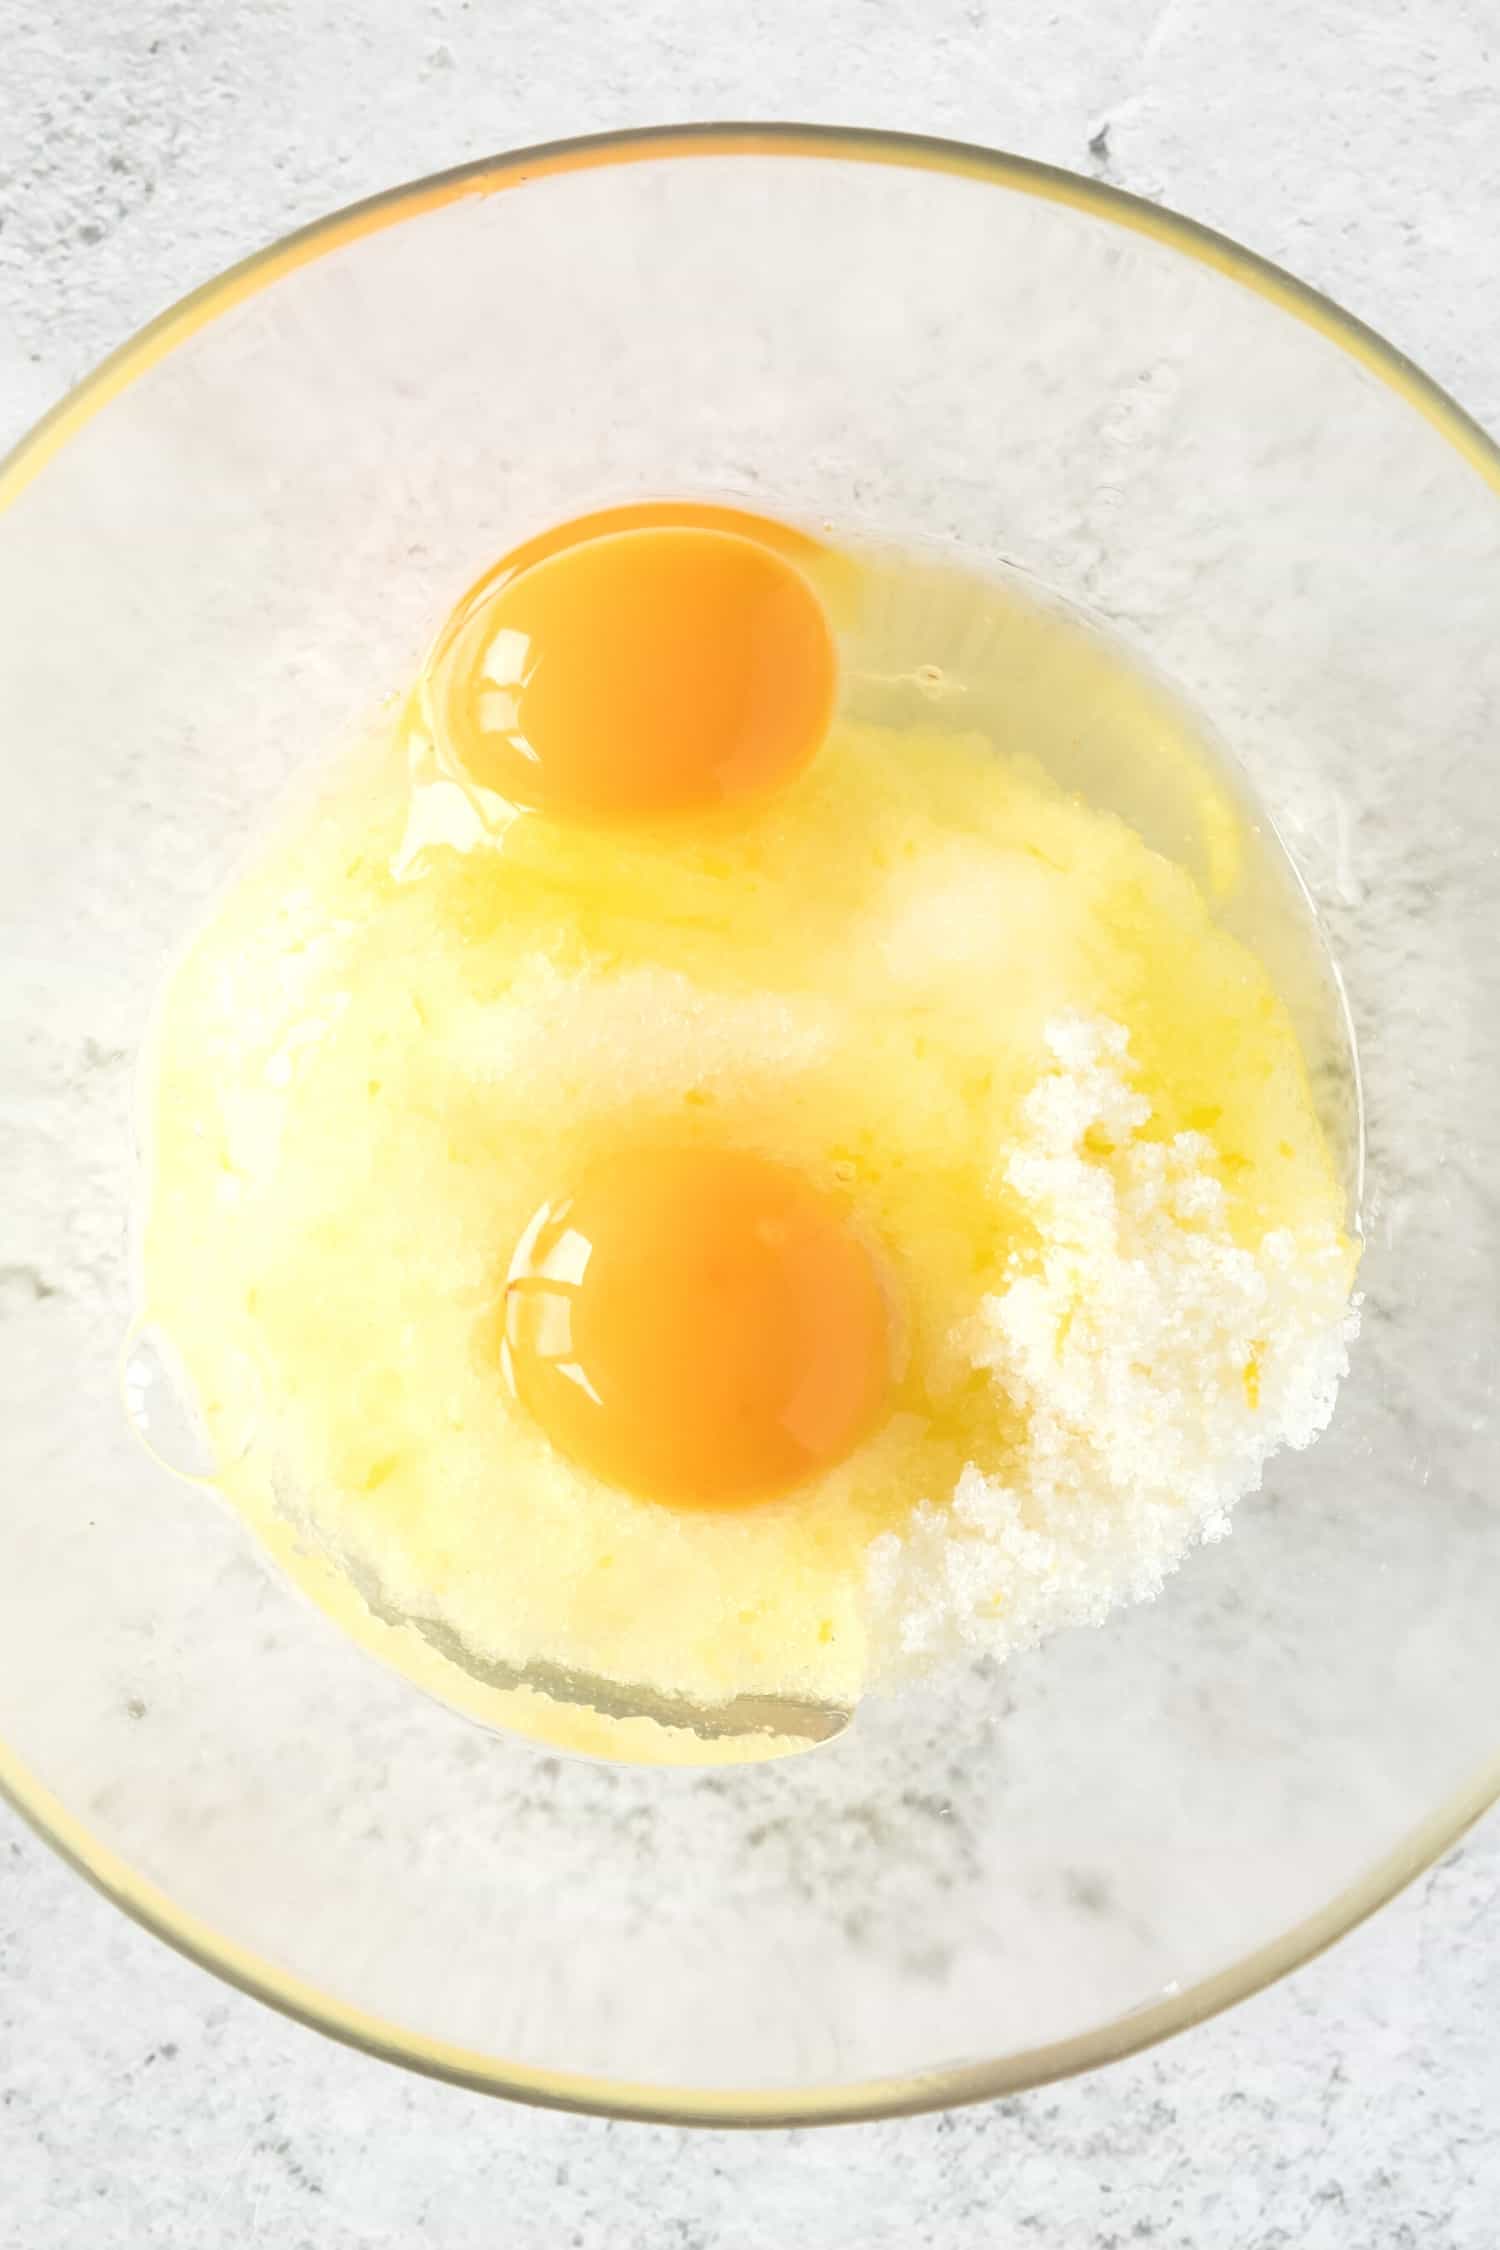 Sugar and eggs in a glass mixing bowl.